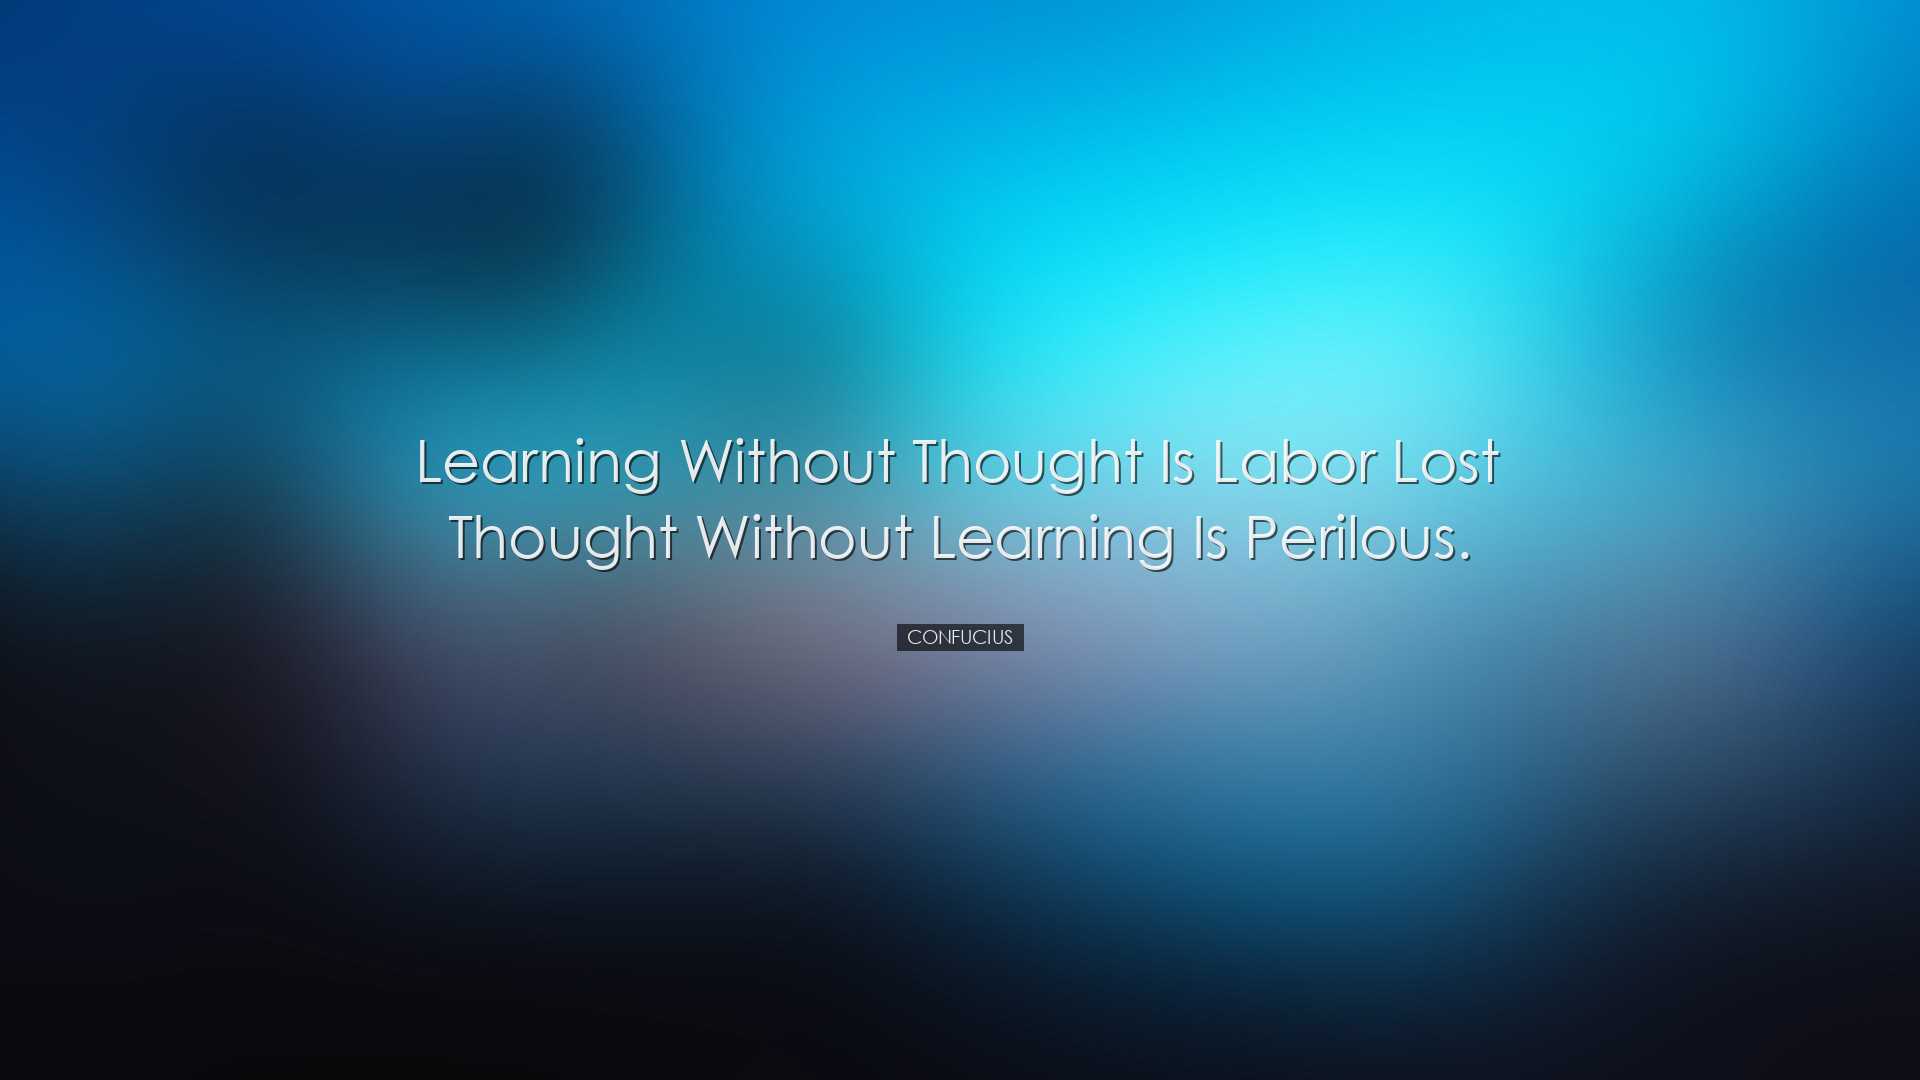 Learning without thought is labor lost thought without learning is